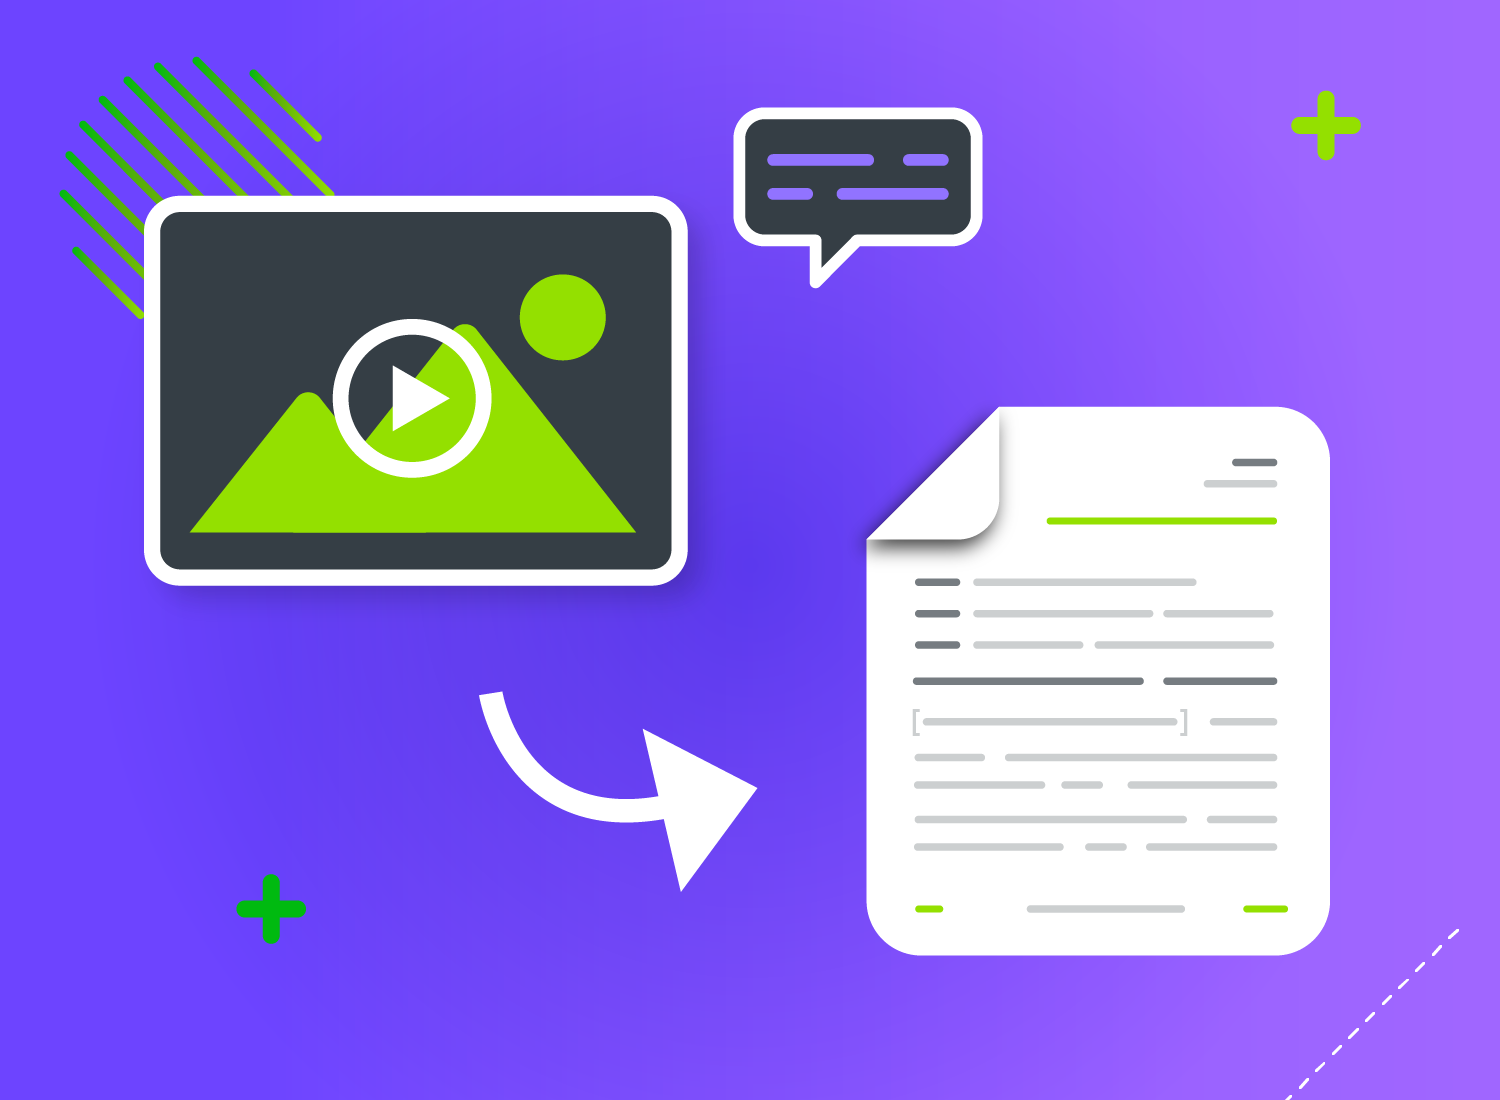 Illustration of a video to text transcription concept with a video player icon on the left, featuring a play button and an image of a mountain landscape. A curved arrow points from the video player to a stylized document on the right, representing the transcription process. The document is filled with lines of text, suggesting converted content from the video.